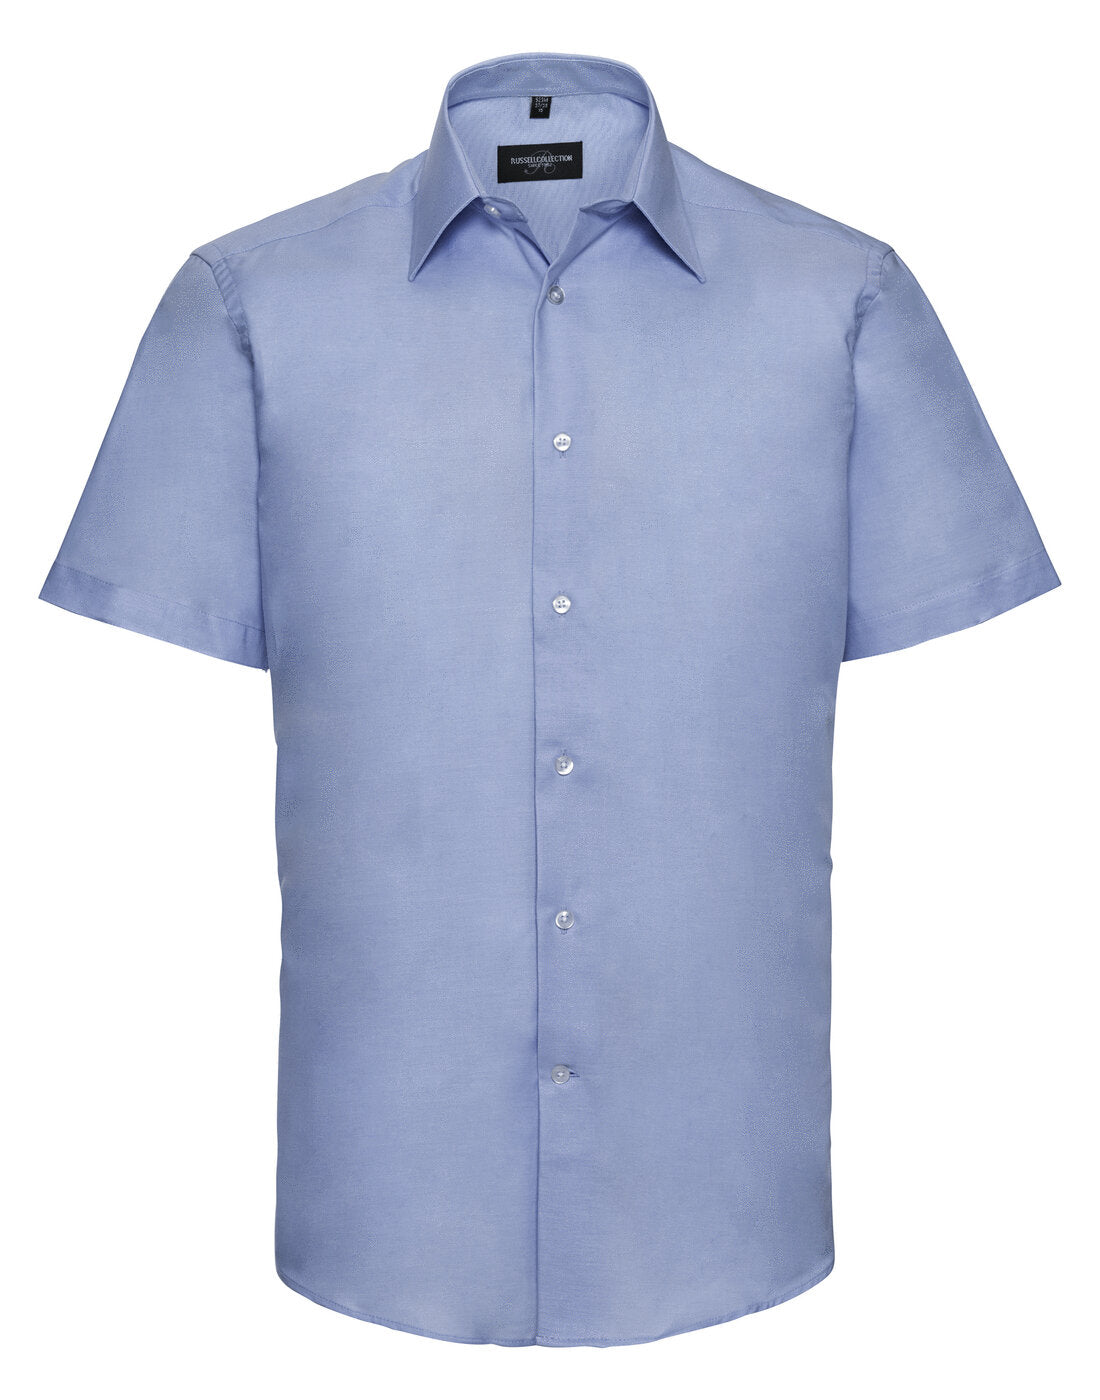 Russell Short Sleeve Tailored Oxford Shirt Oxford Blue